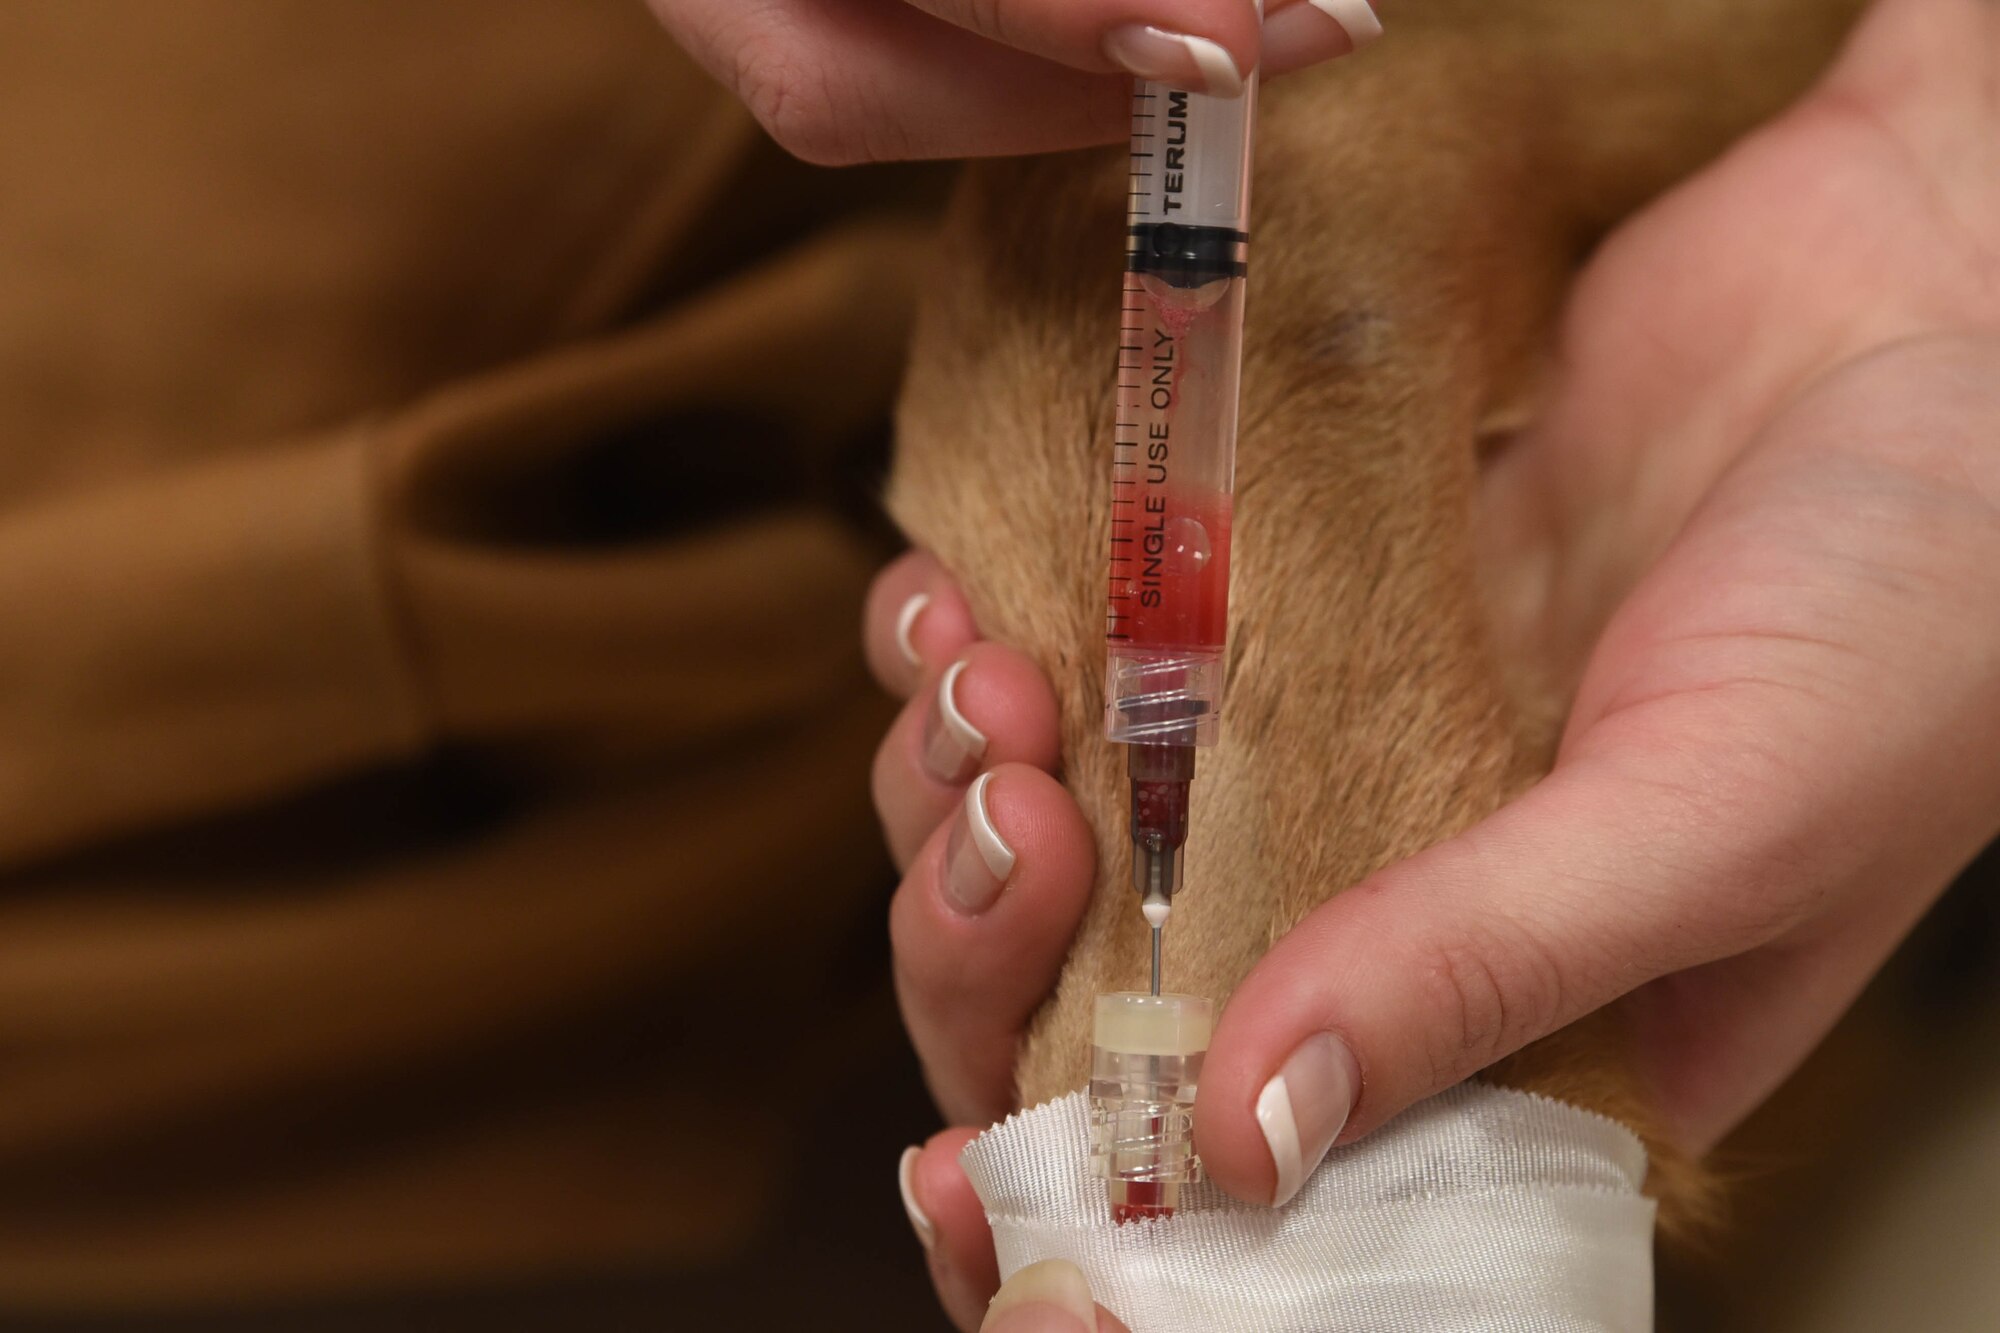 Staff Sgt. Samantha Champion, a 28th Security Forces Squadron military working dog handler, gives MWD Lezer an injection through an I.V. port at the veterinary clinic on Ellsworth Air Force Base, S.D., Dec. 4, 2018. The MWD handlers are trained to be able to administer life-saving treatment to their companions if necessary.  (U.S. Air Force photo by Airman John Ennis)